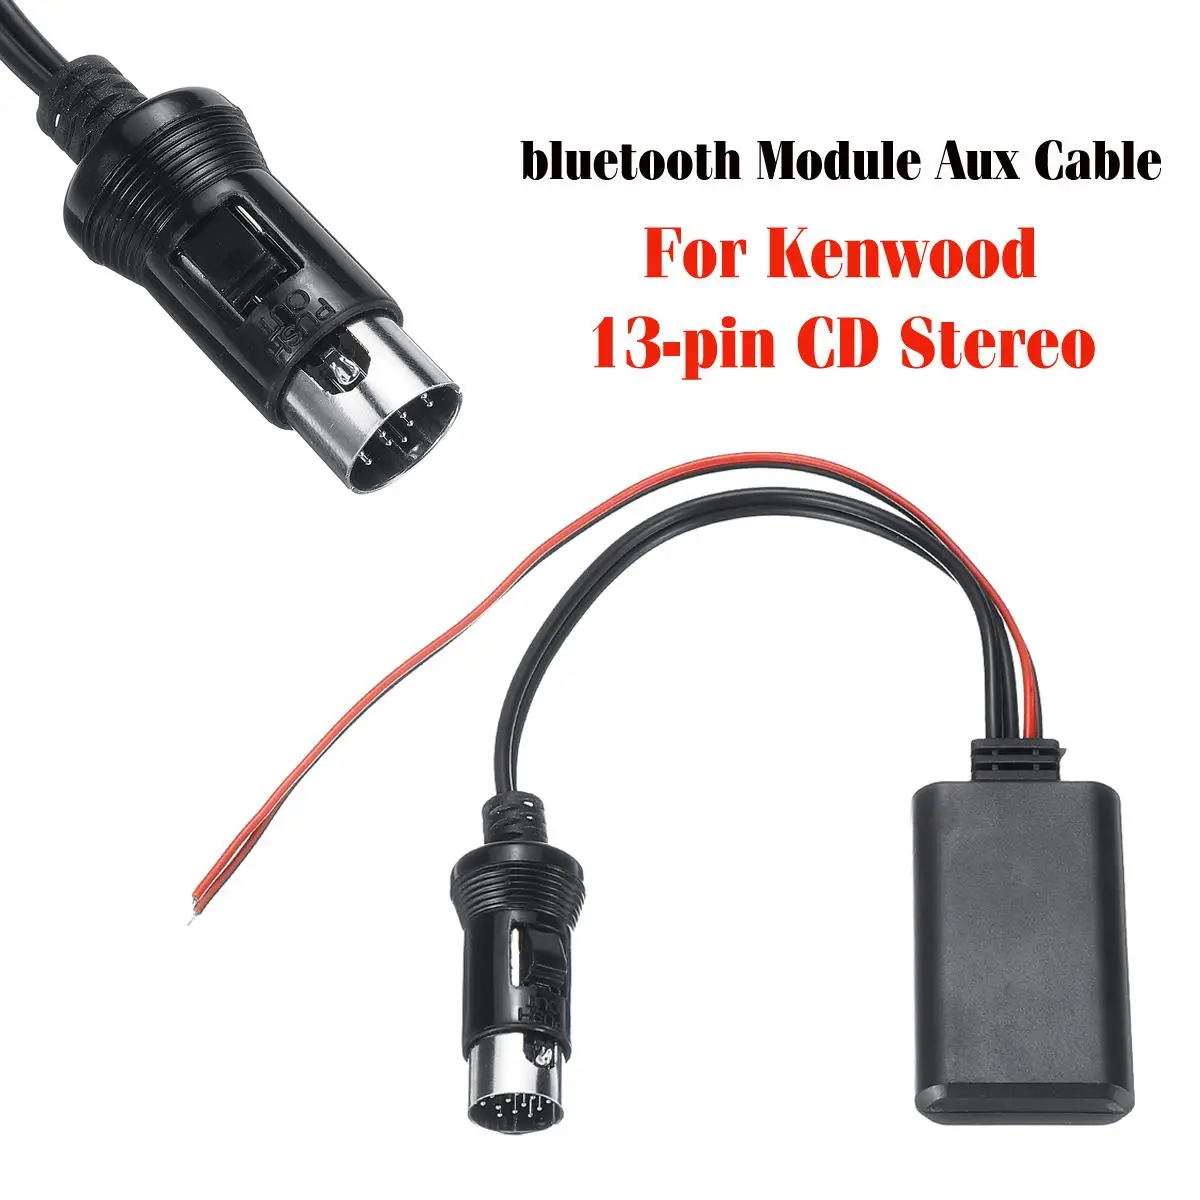 Car Bluetooth Module Audio Auxiliary Cable Adapter Receiverfor Kenwood All 13-pin CD Stereo  Car Electronics Accessories